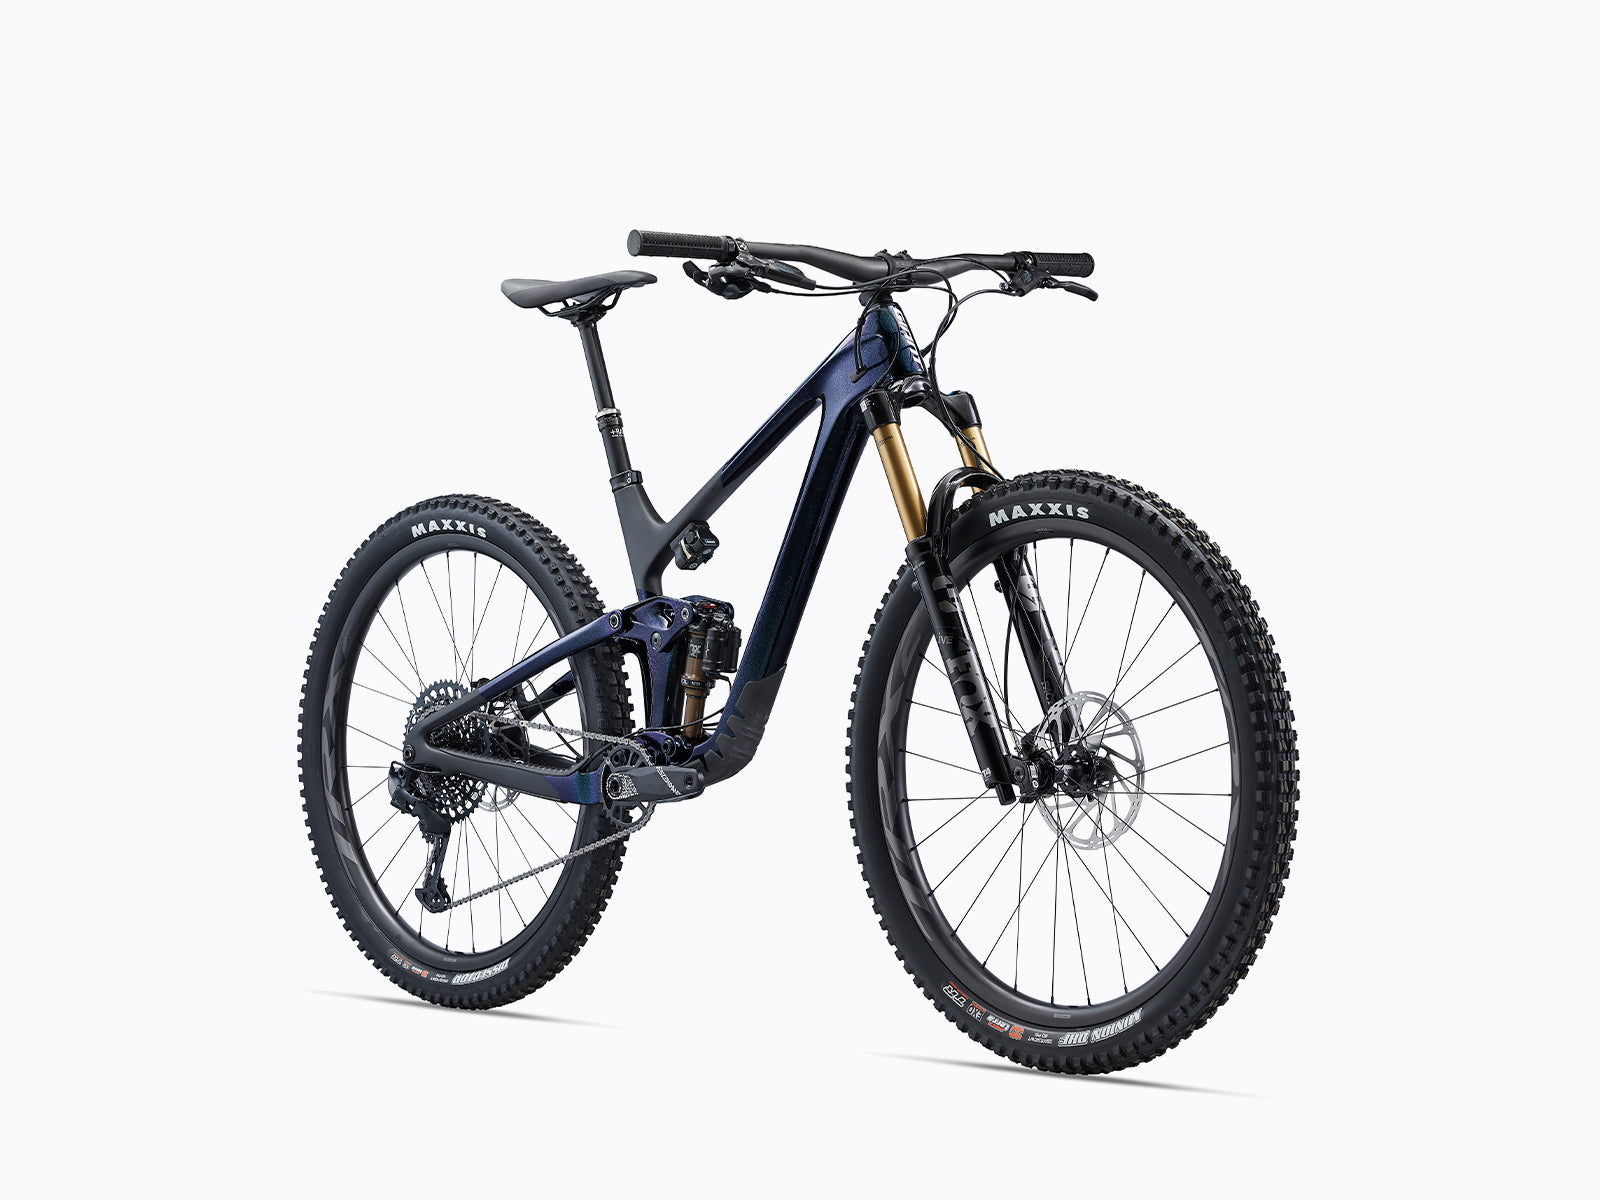 Image features the Giant Trance X Advanced pro 29 1, a hardtail mountain bike. Now available at Giant Melbourne, an Australian bike shop.